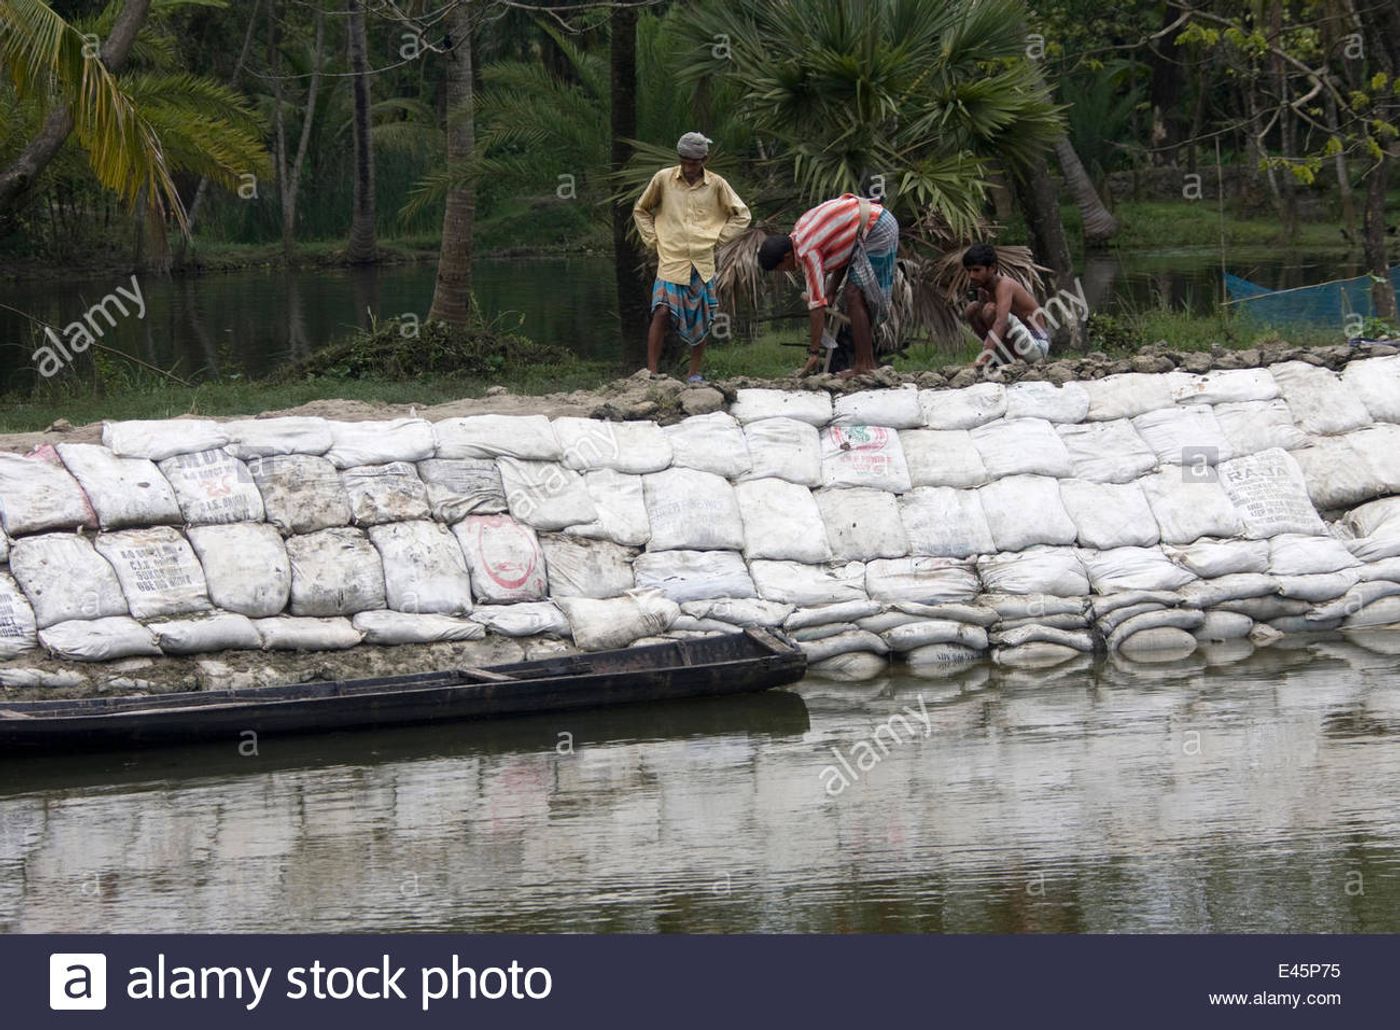 This sea wall is being constructed to protect a fishing village from flooding in Sundarbans, Bangladesh. Photo: Alamy